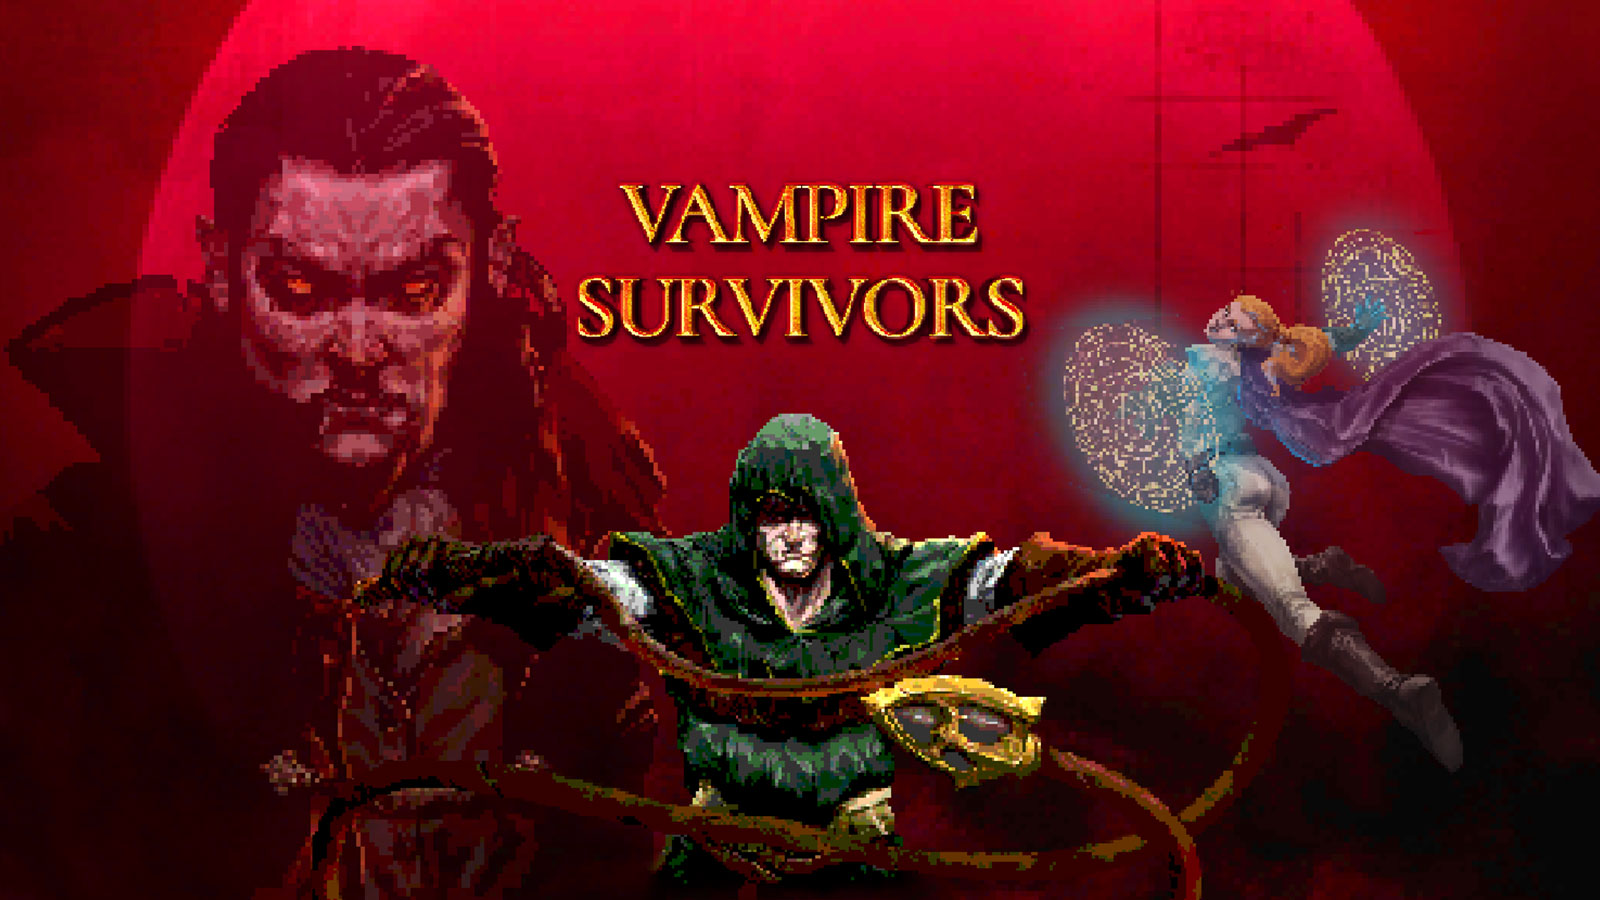 “Vampire Survivors” lands on Android and iOS